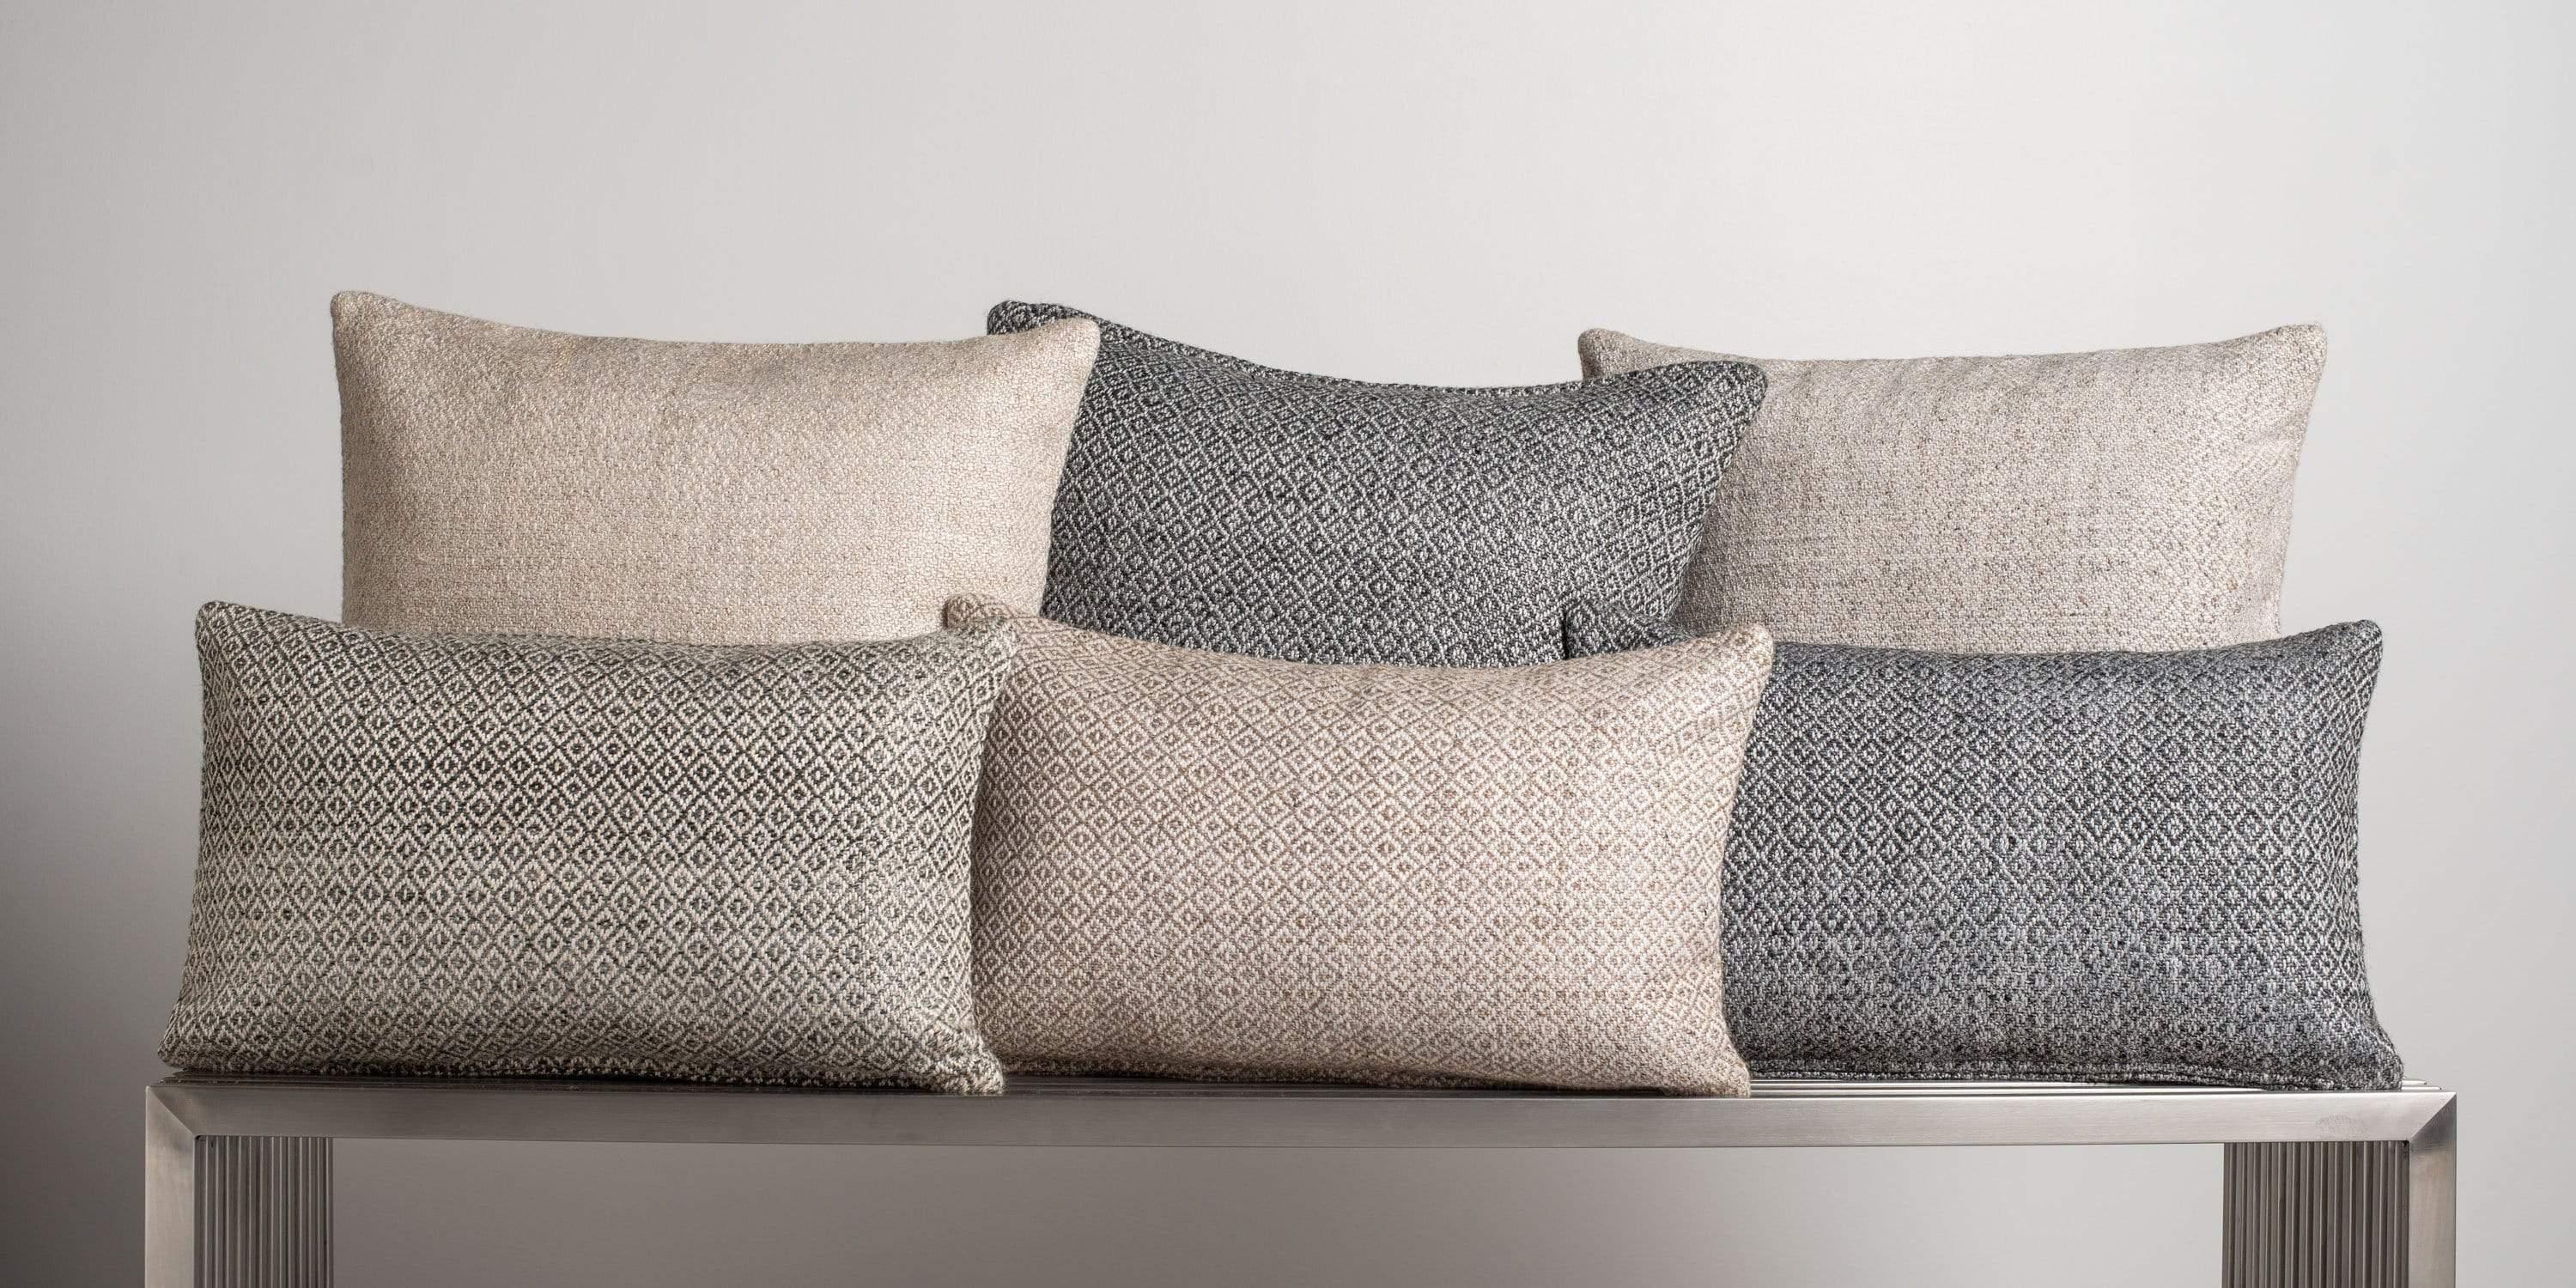 Rich in texture, woven with a subtly graphic pattern, our double-diamond pillow adds interest to your pillowscape, pair with our solid cashmere and textured pillows to round out your design. Pillow insert sold separately.

Size 13